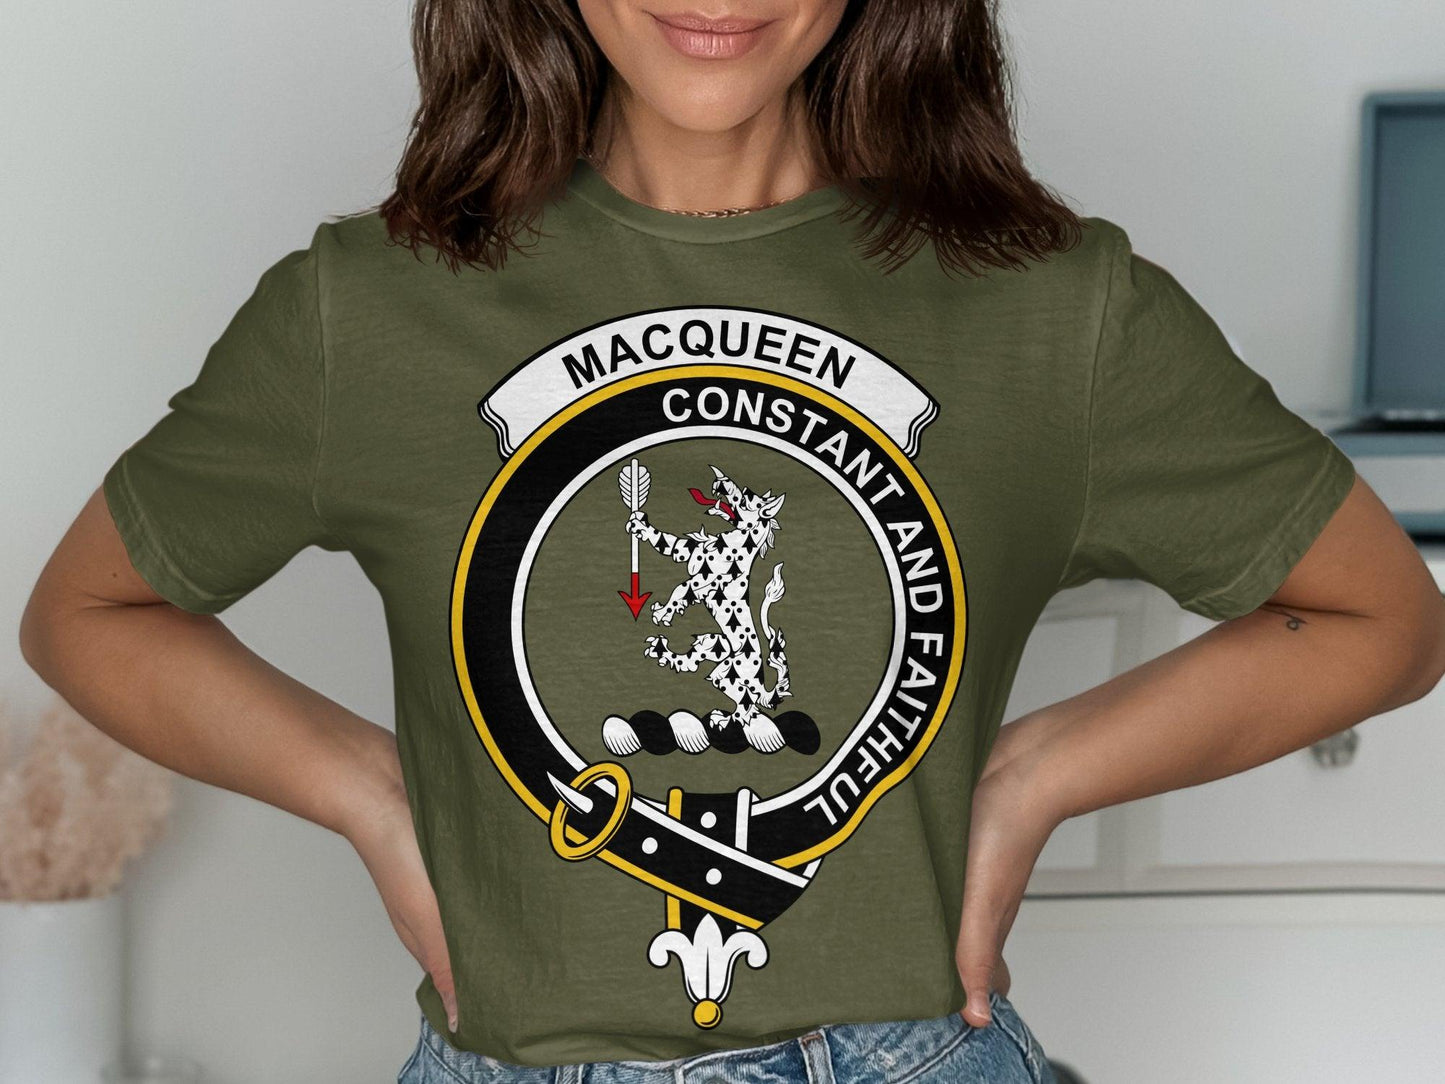 Authentic Scottish Clan MacQueen Crest Emblem T-Shirt - Living Stone Gifts